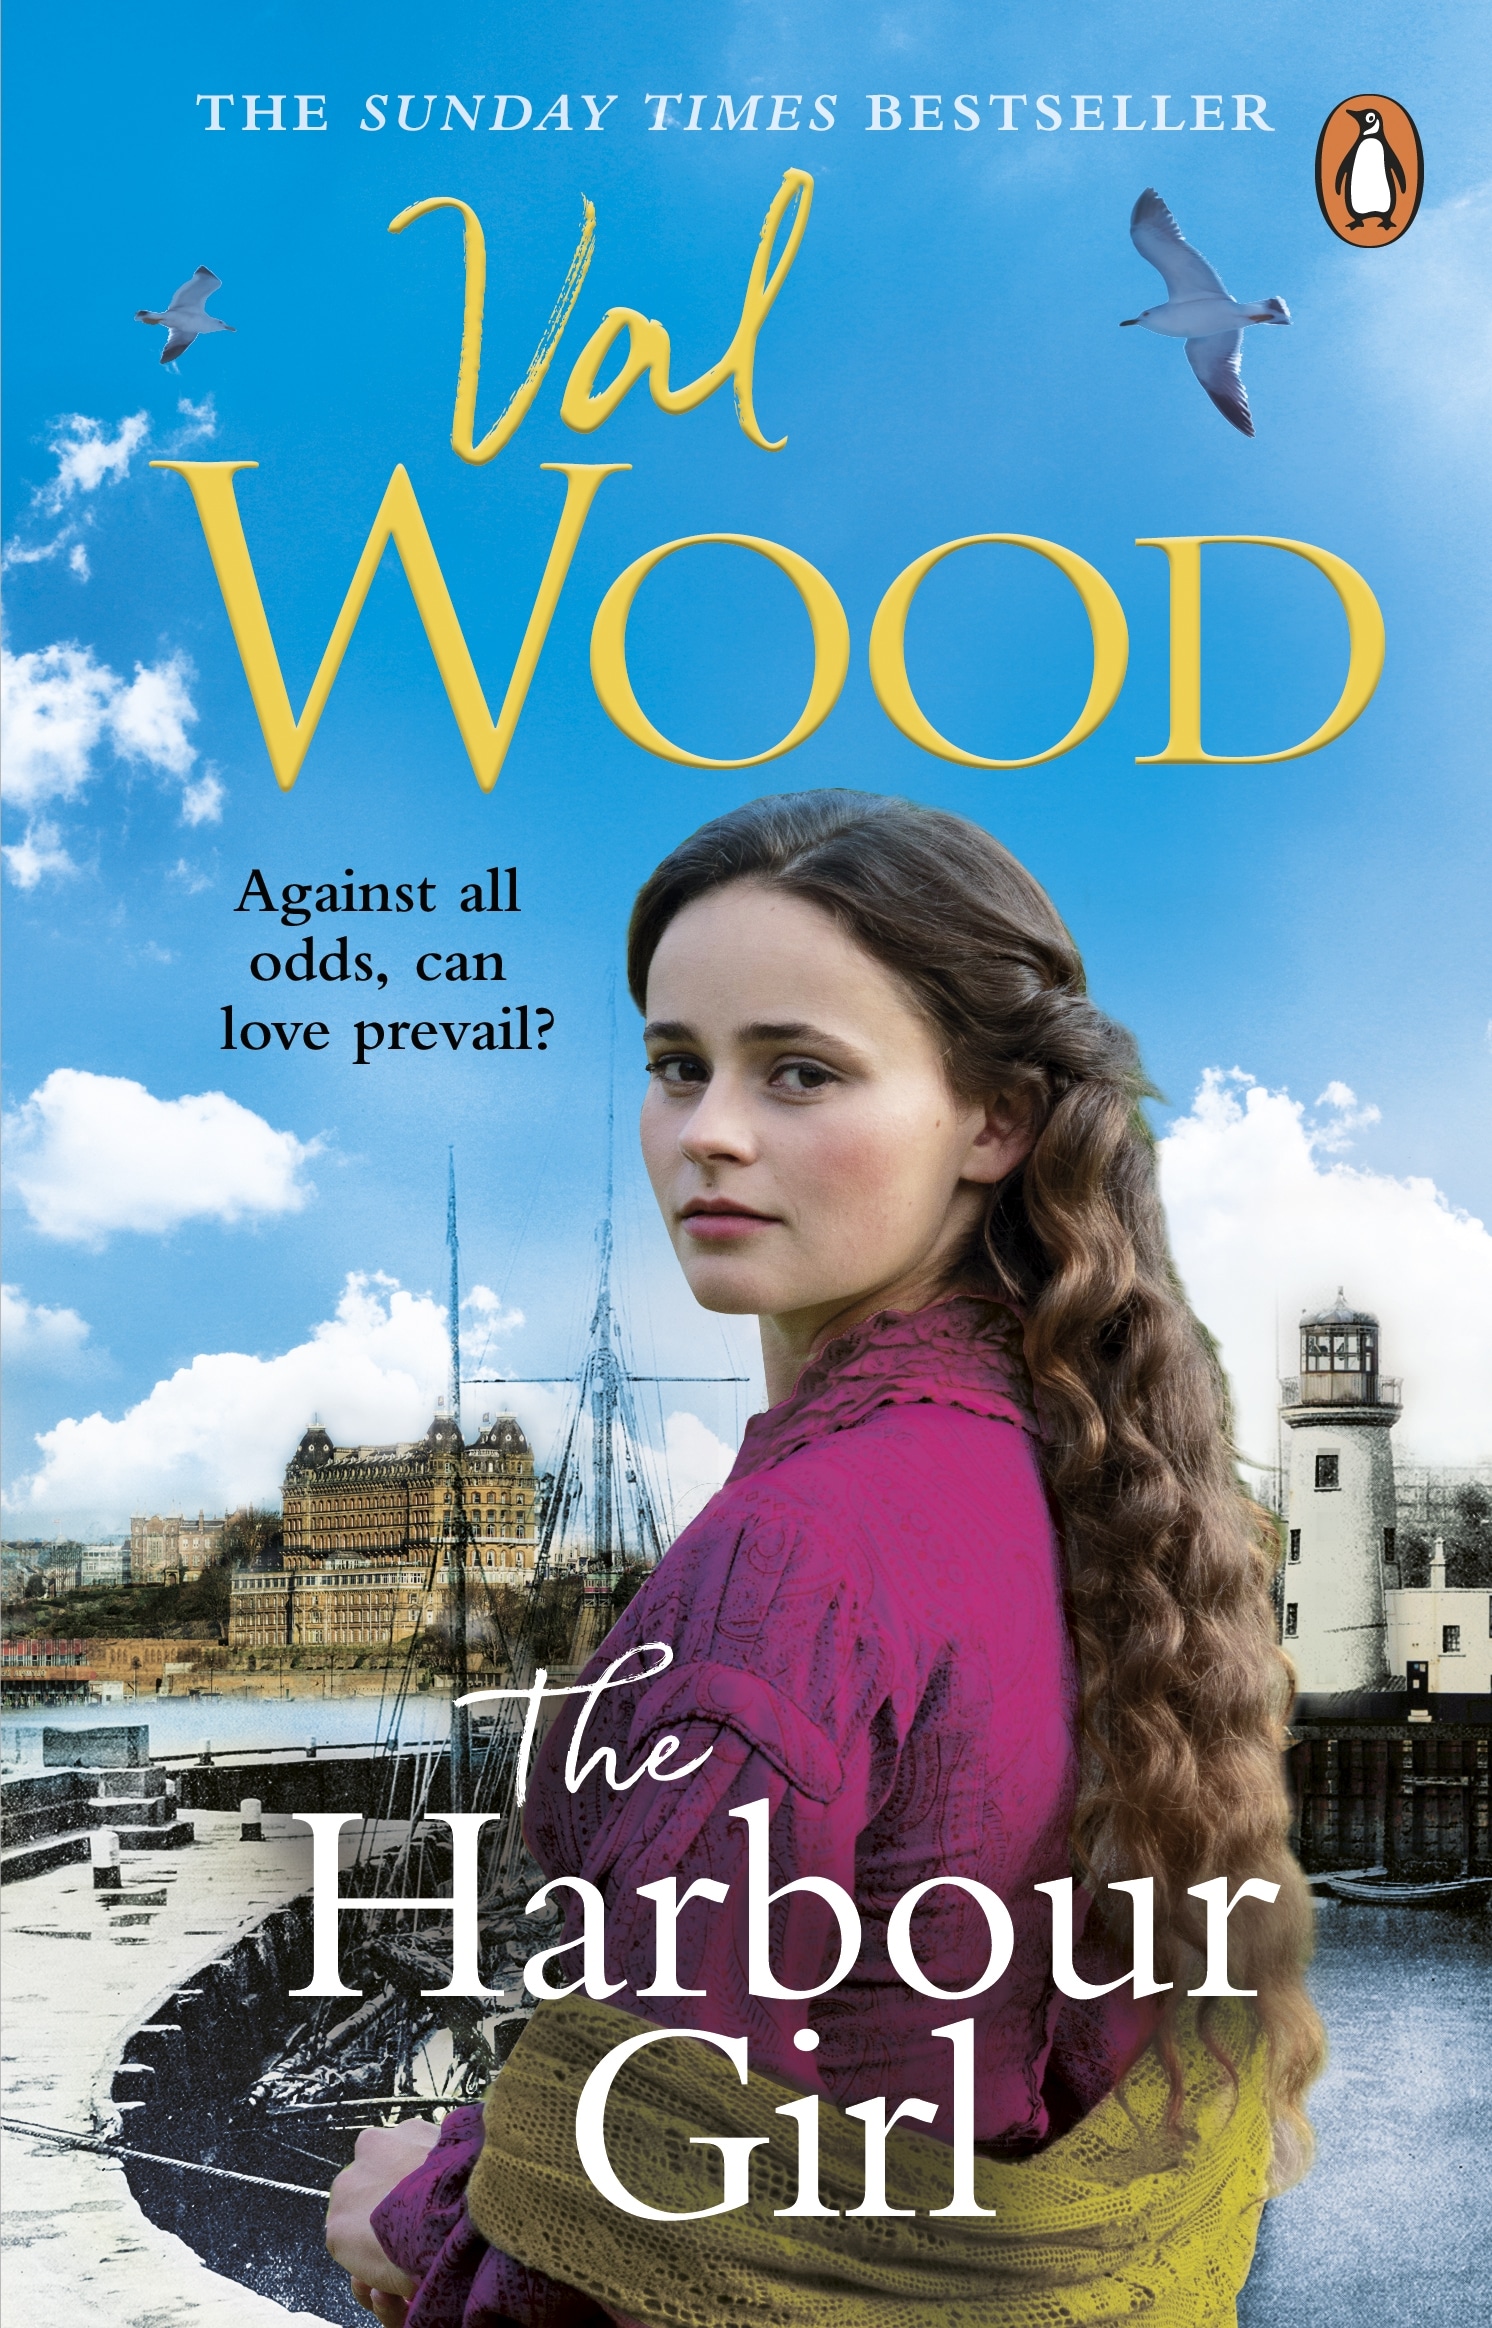 Book “The Harbour Girl” by Val Wood — June 23, 2022